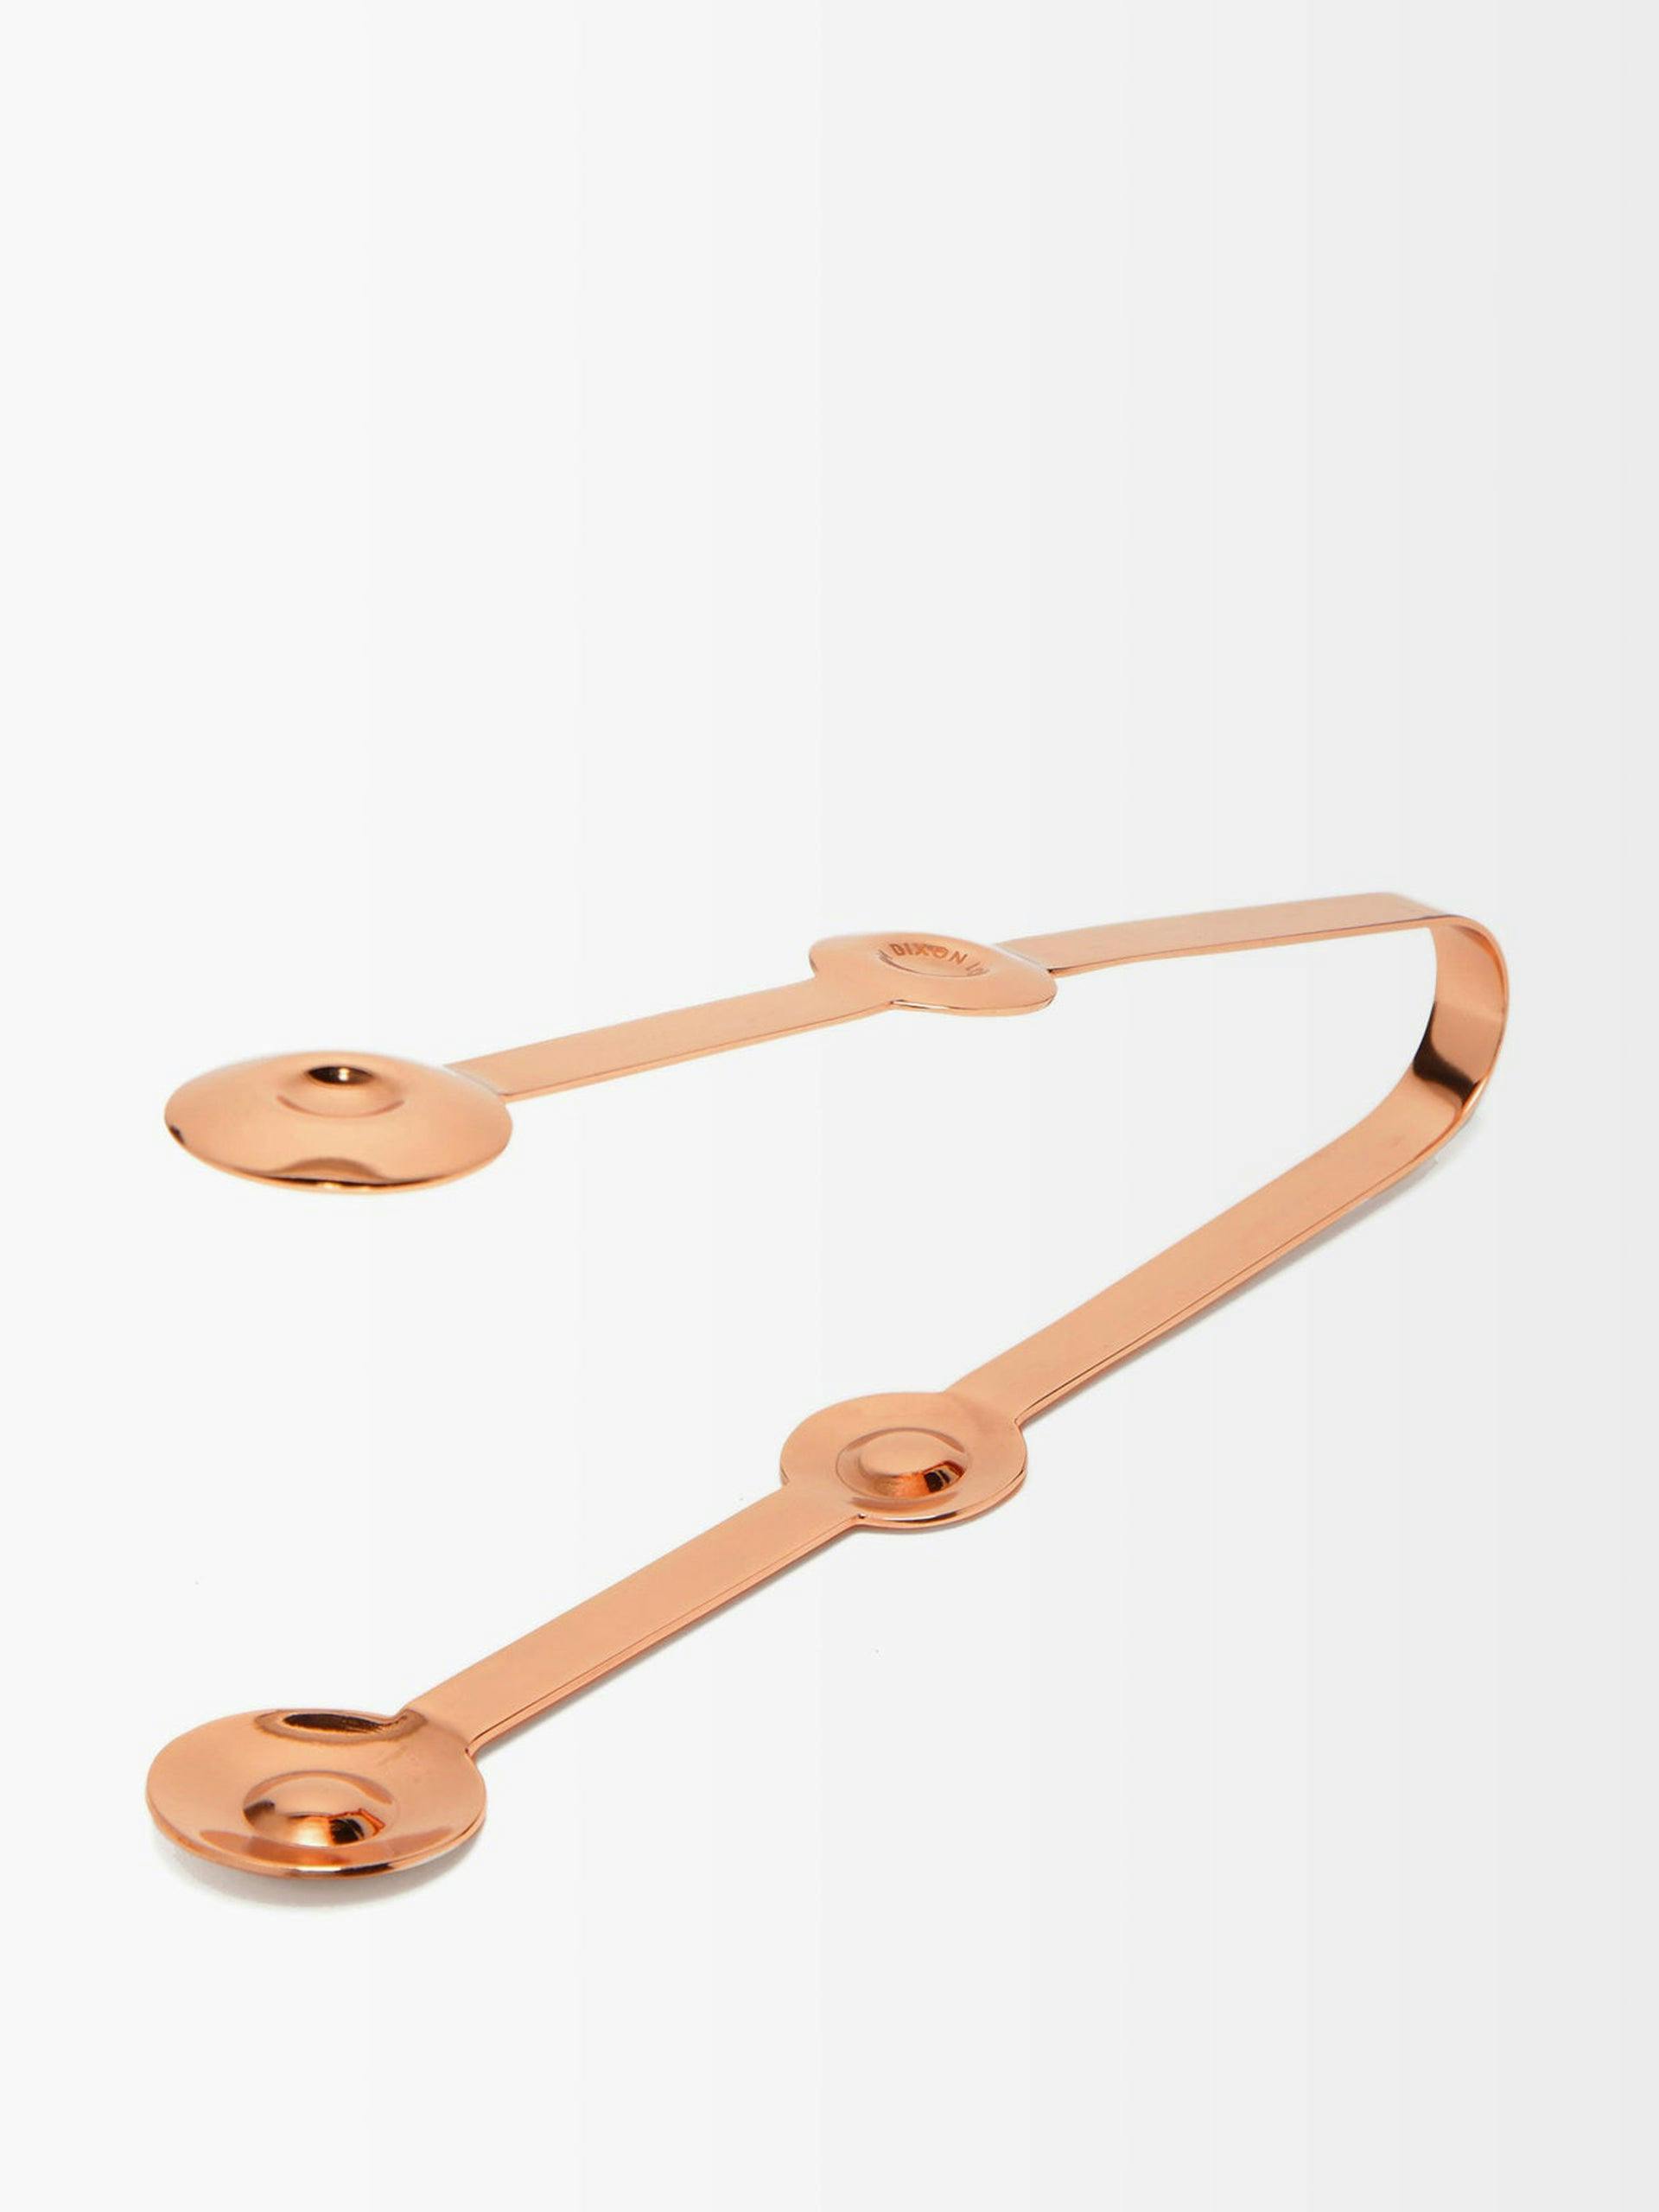 Plum copper-plated steel tongs